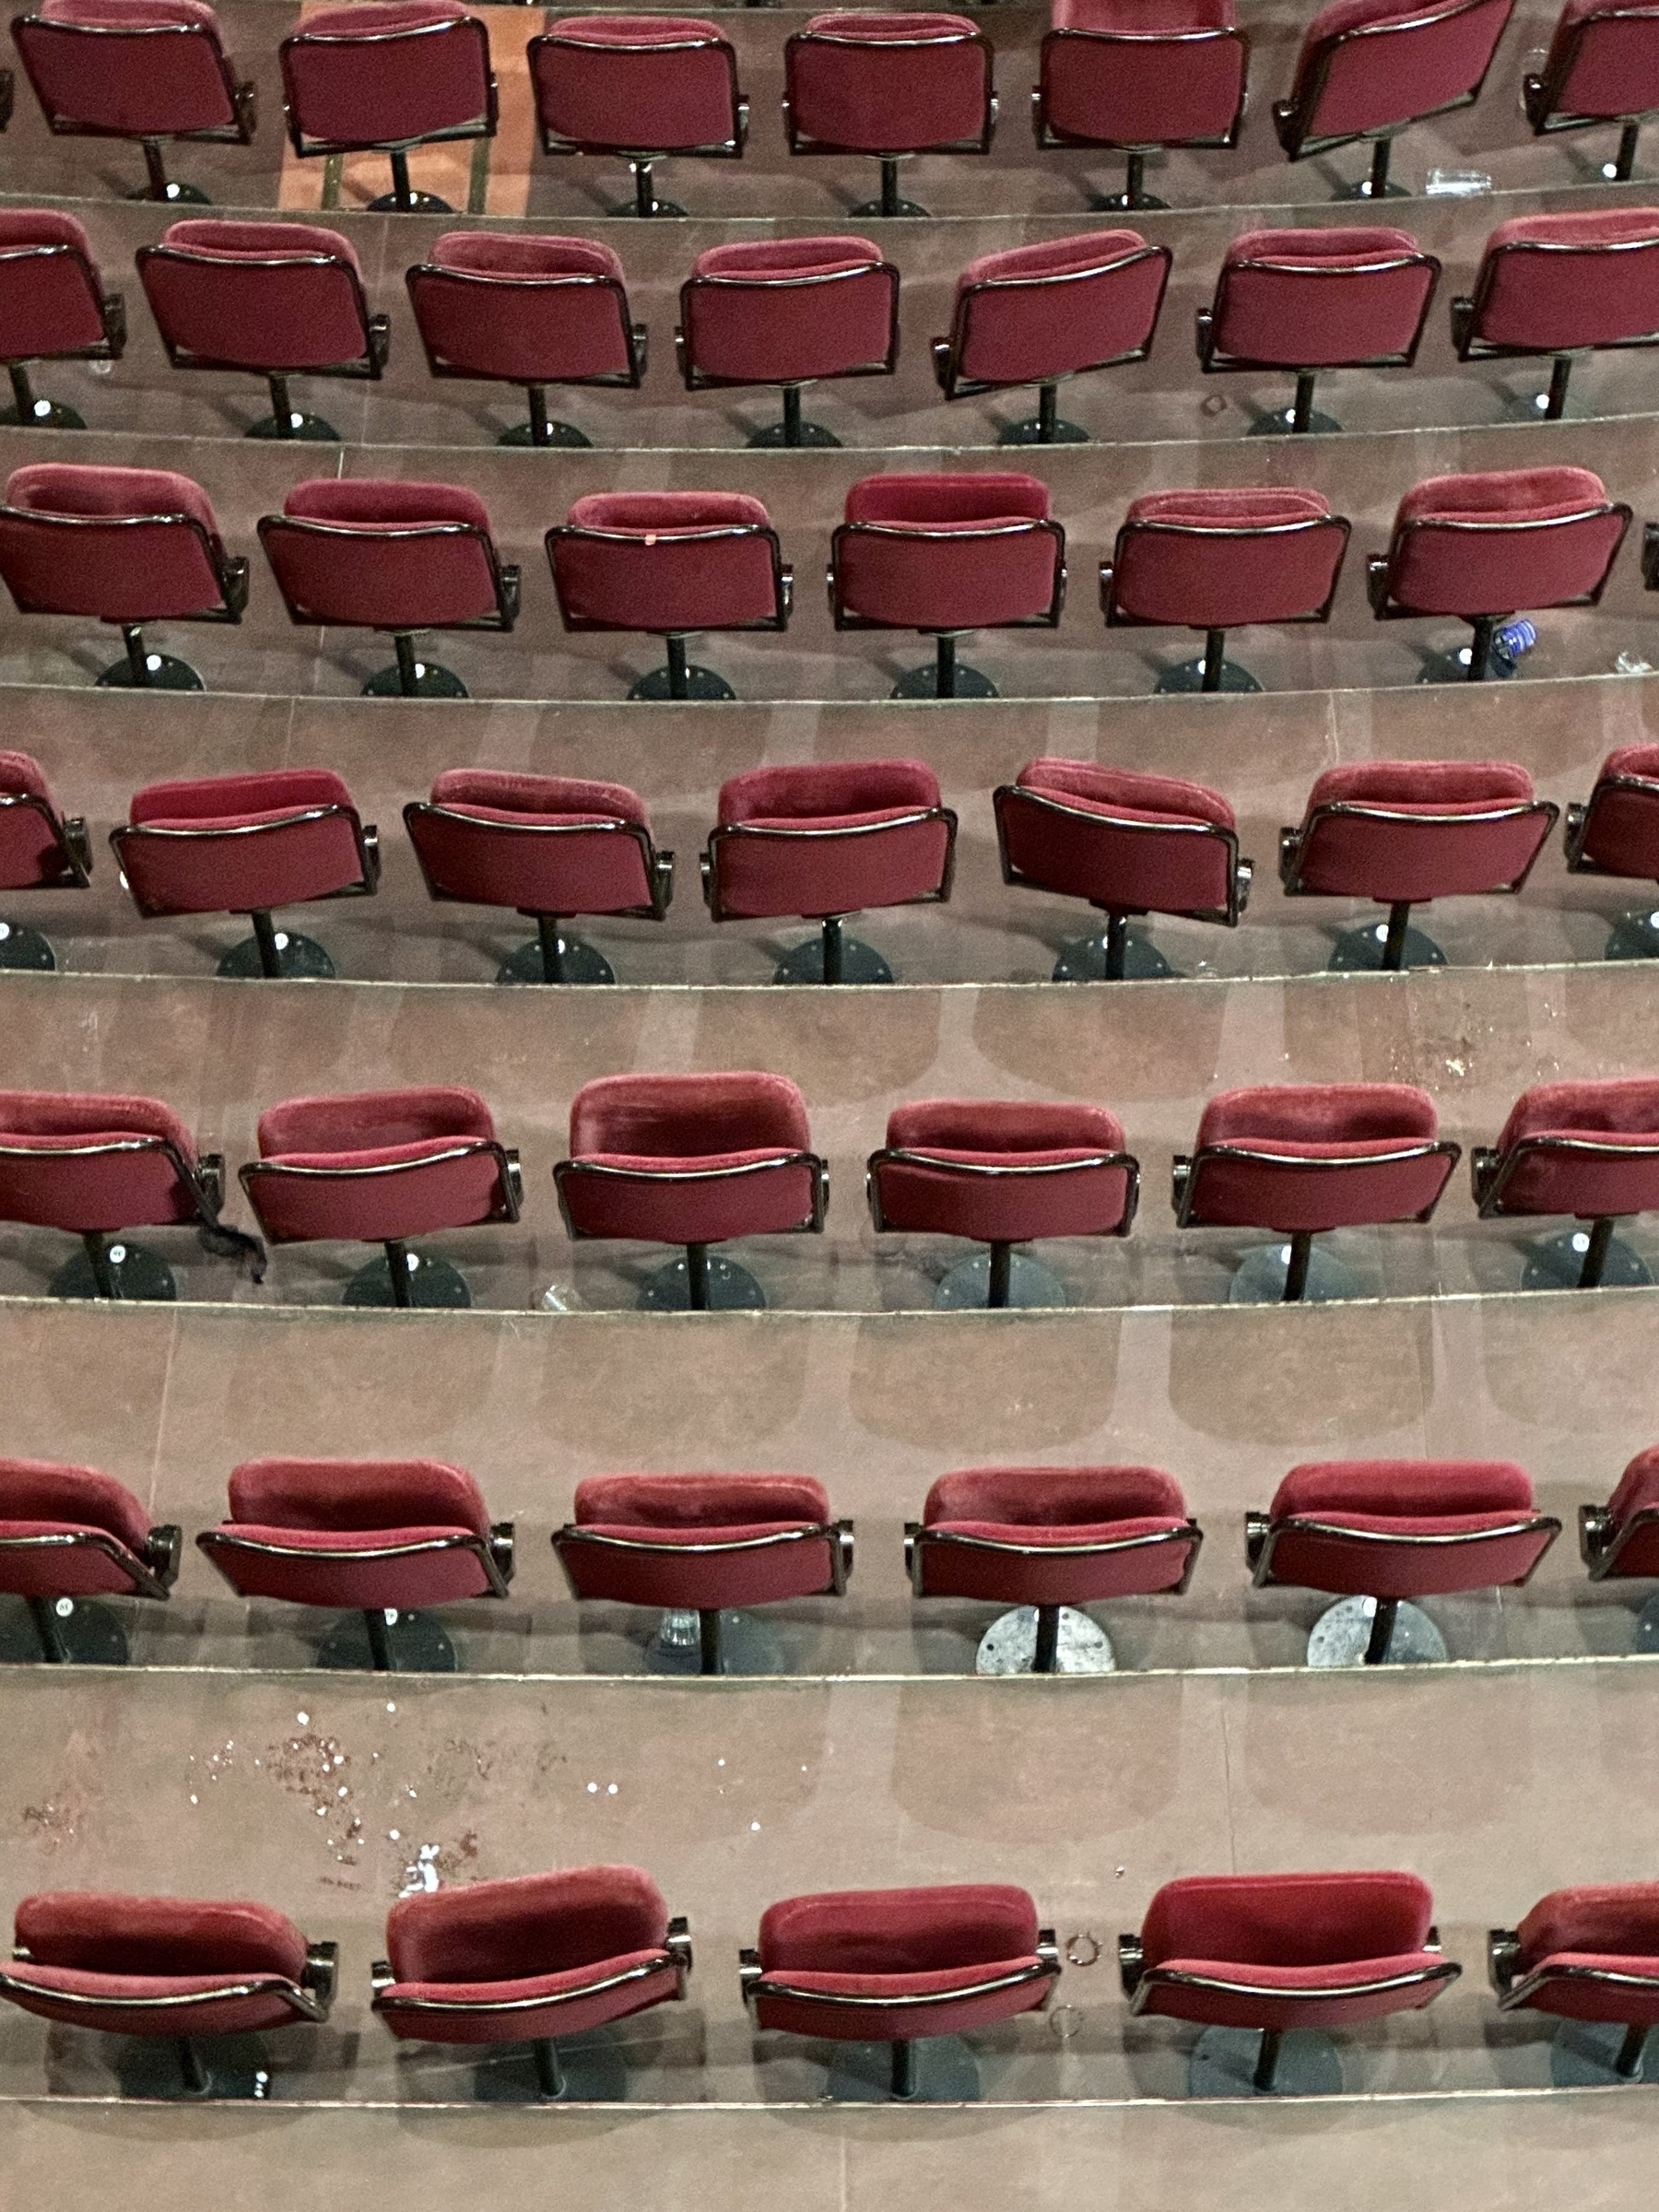 Looking down on to rows of empty red seats at the Royal Albert Hall.